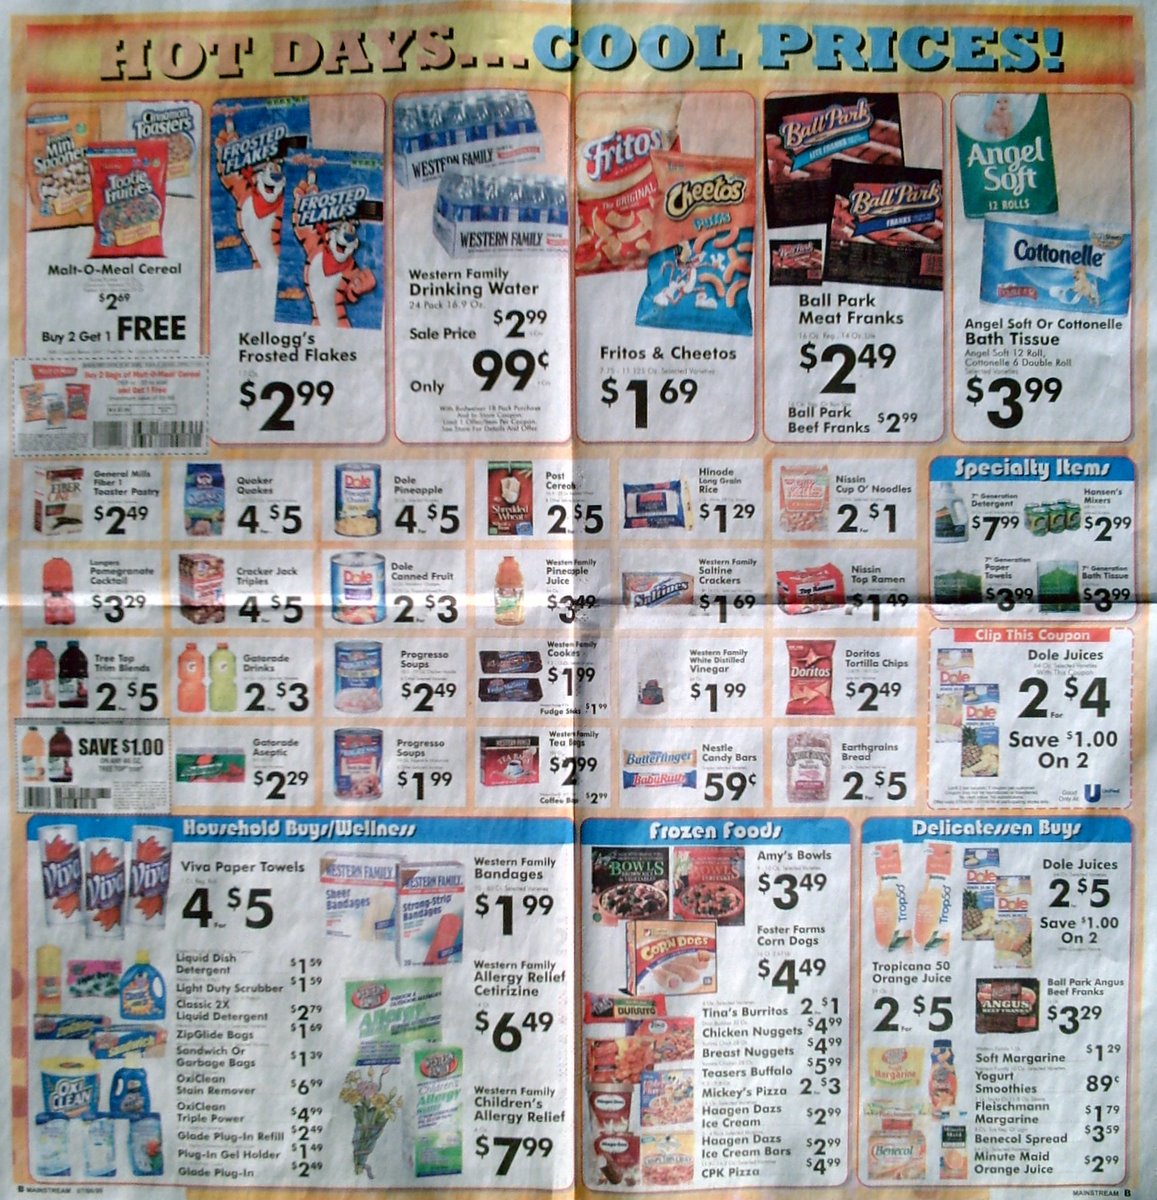 Big Trees Market Weekly Ad for July 8-14, 2009